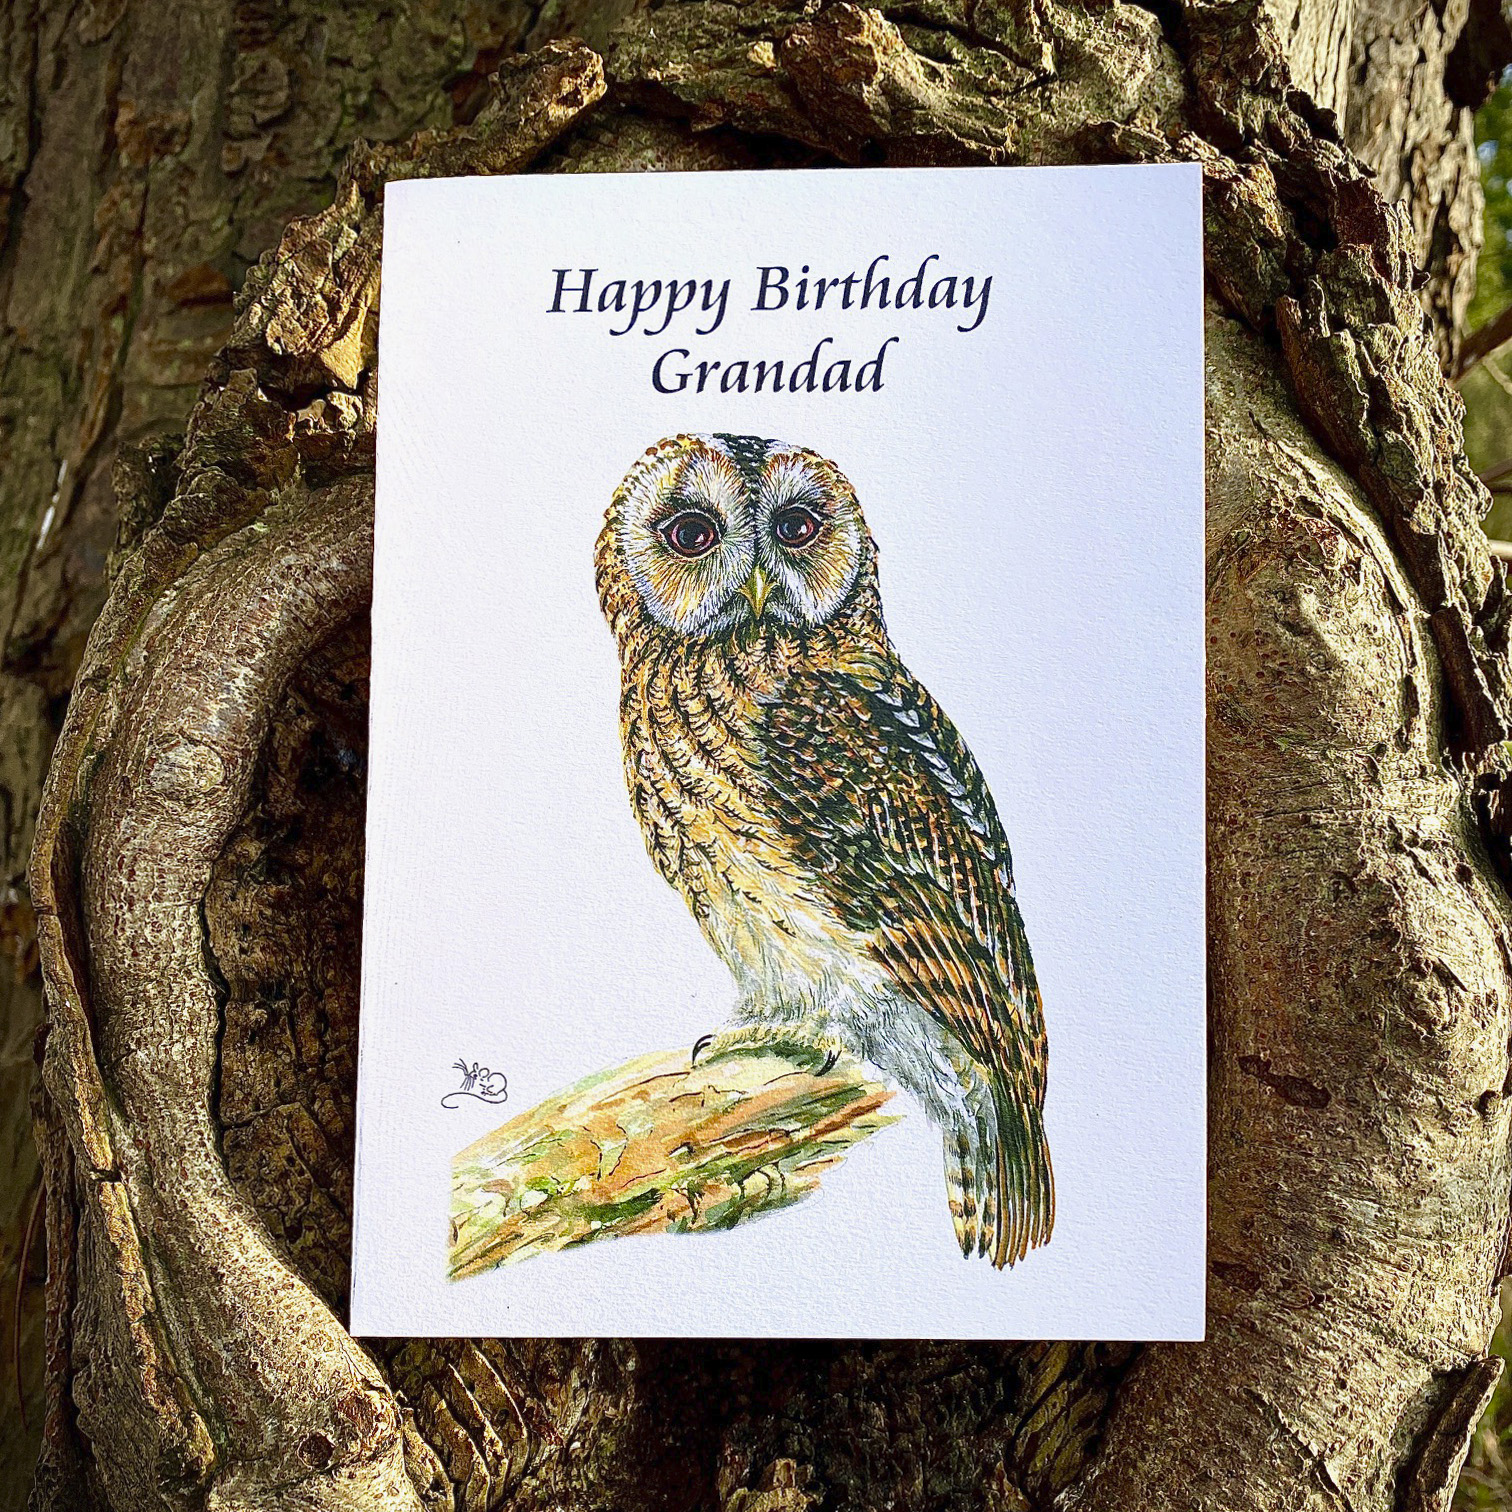 Happy Birthday Granadad greetings card, card, happy birthday, Grandad, Grandfather, Grandpa, Tawny owl, owl, wise, old bird, british, Mouse, Mouse Macpherson, wilidebybymouse,